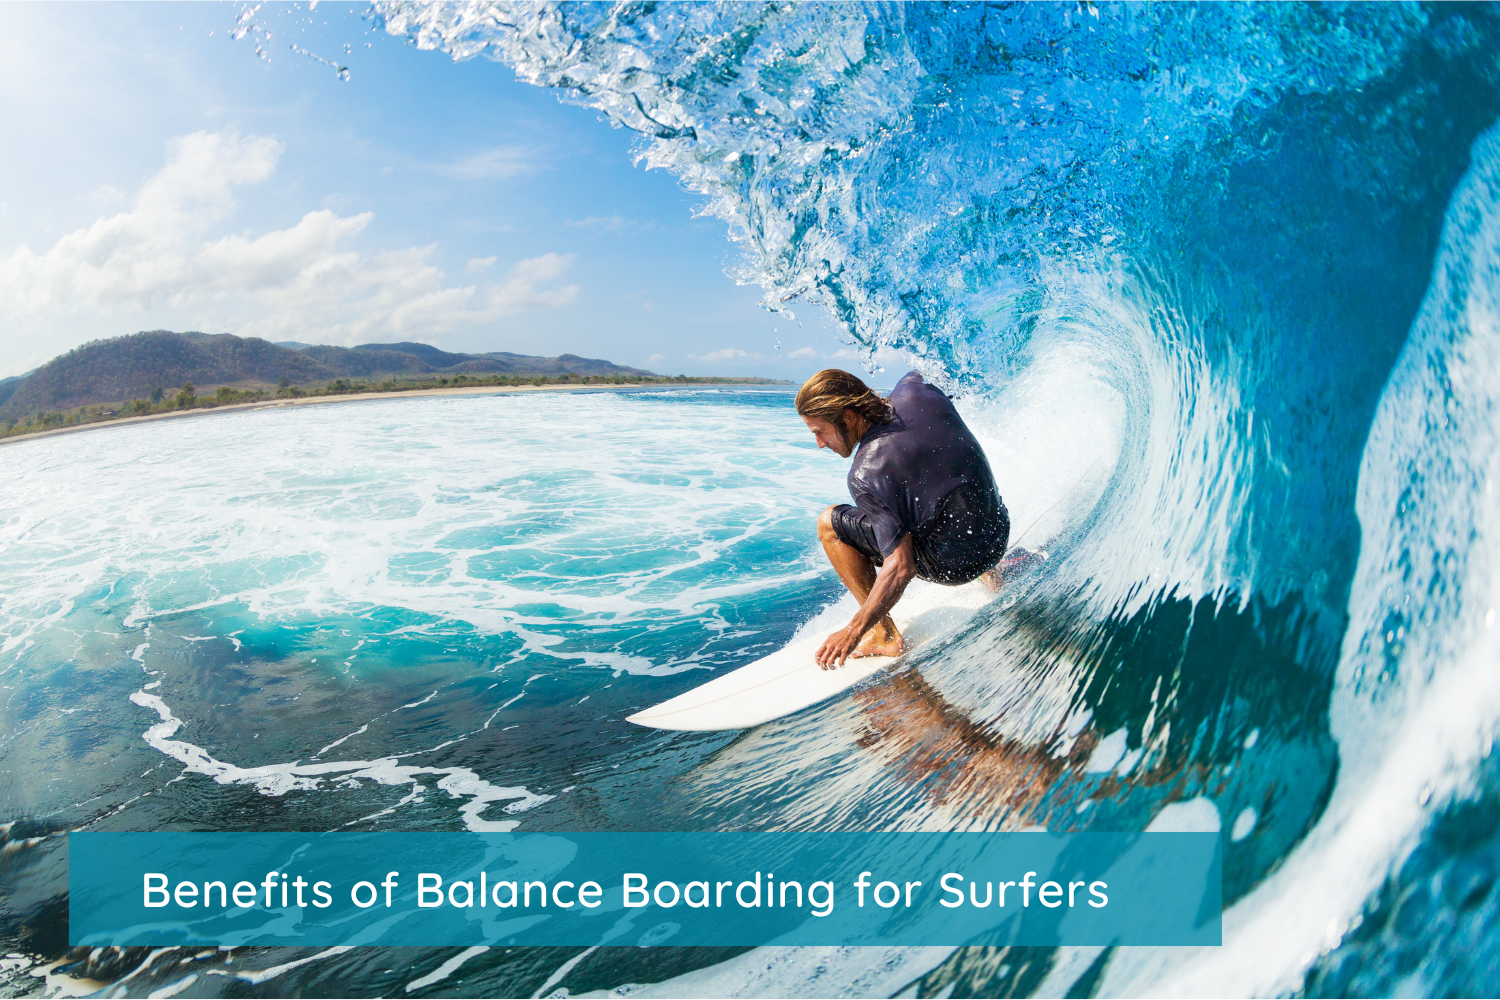 Benefits of Balance Boarding for Surfers